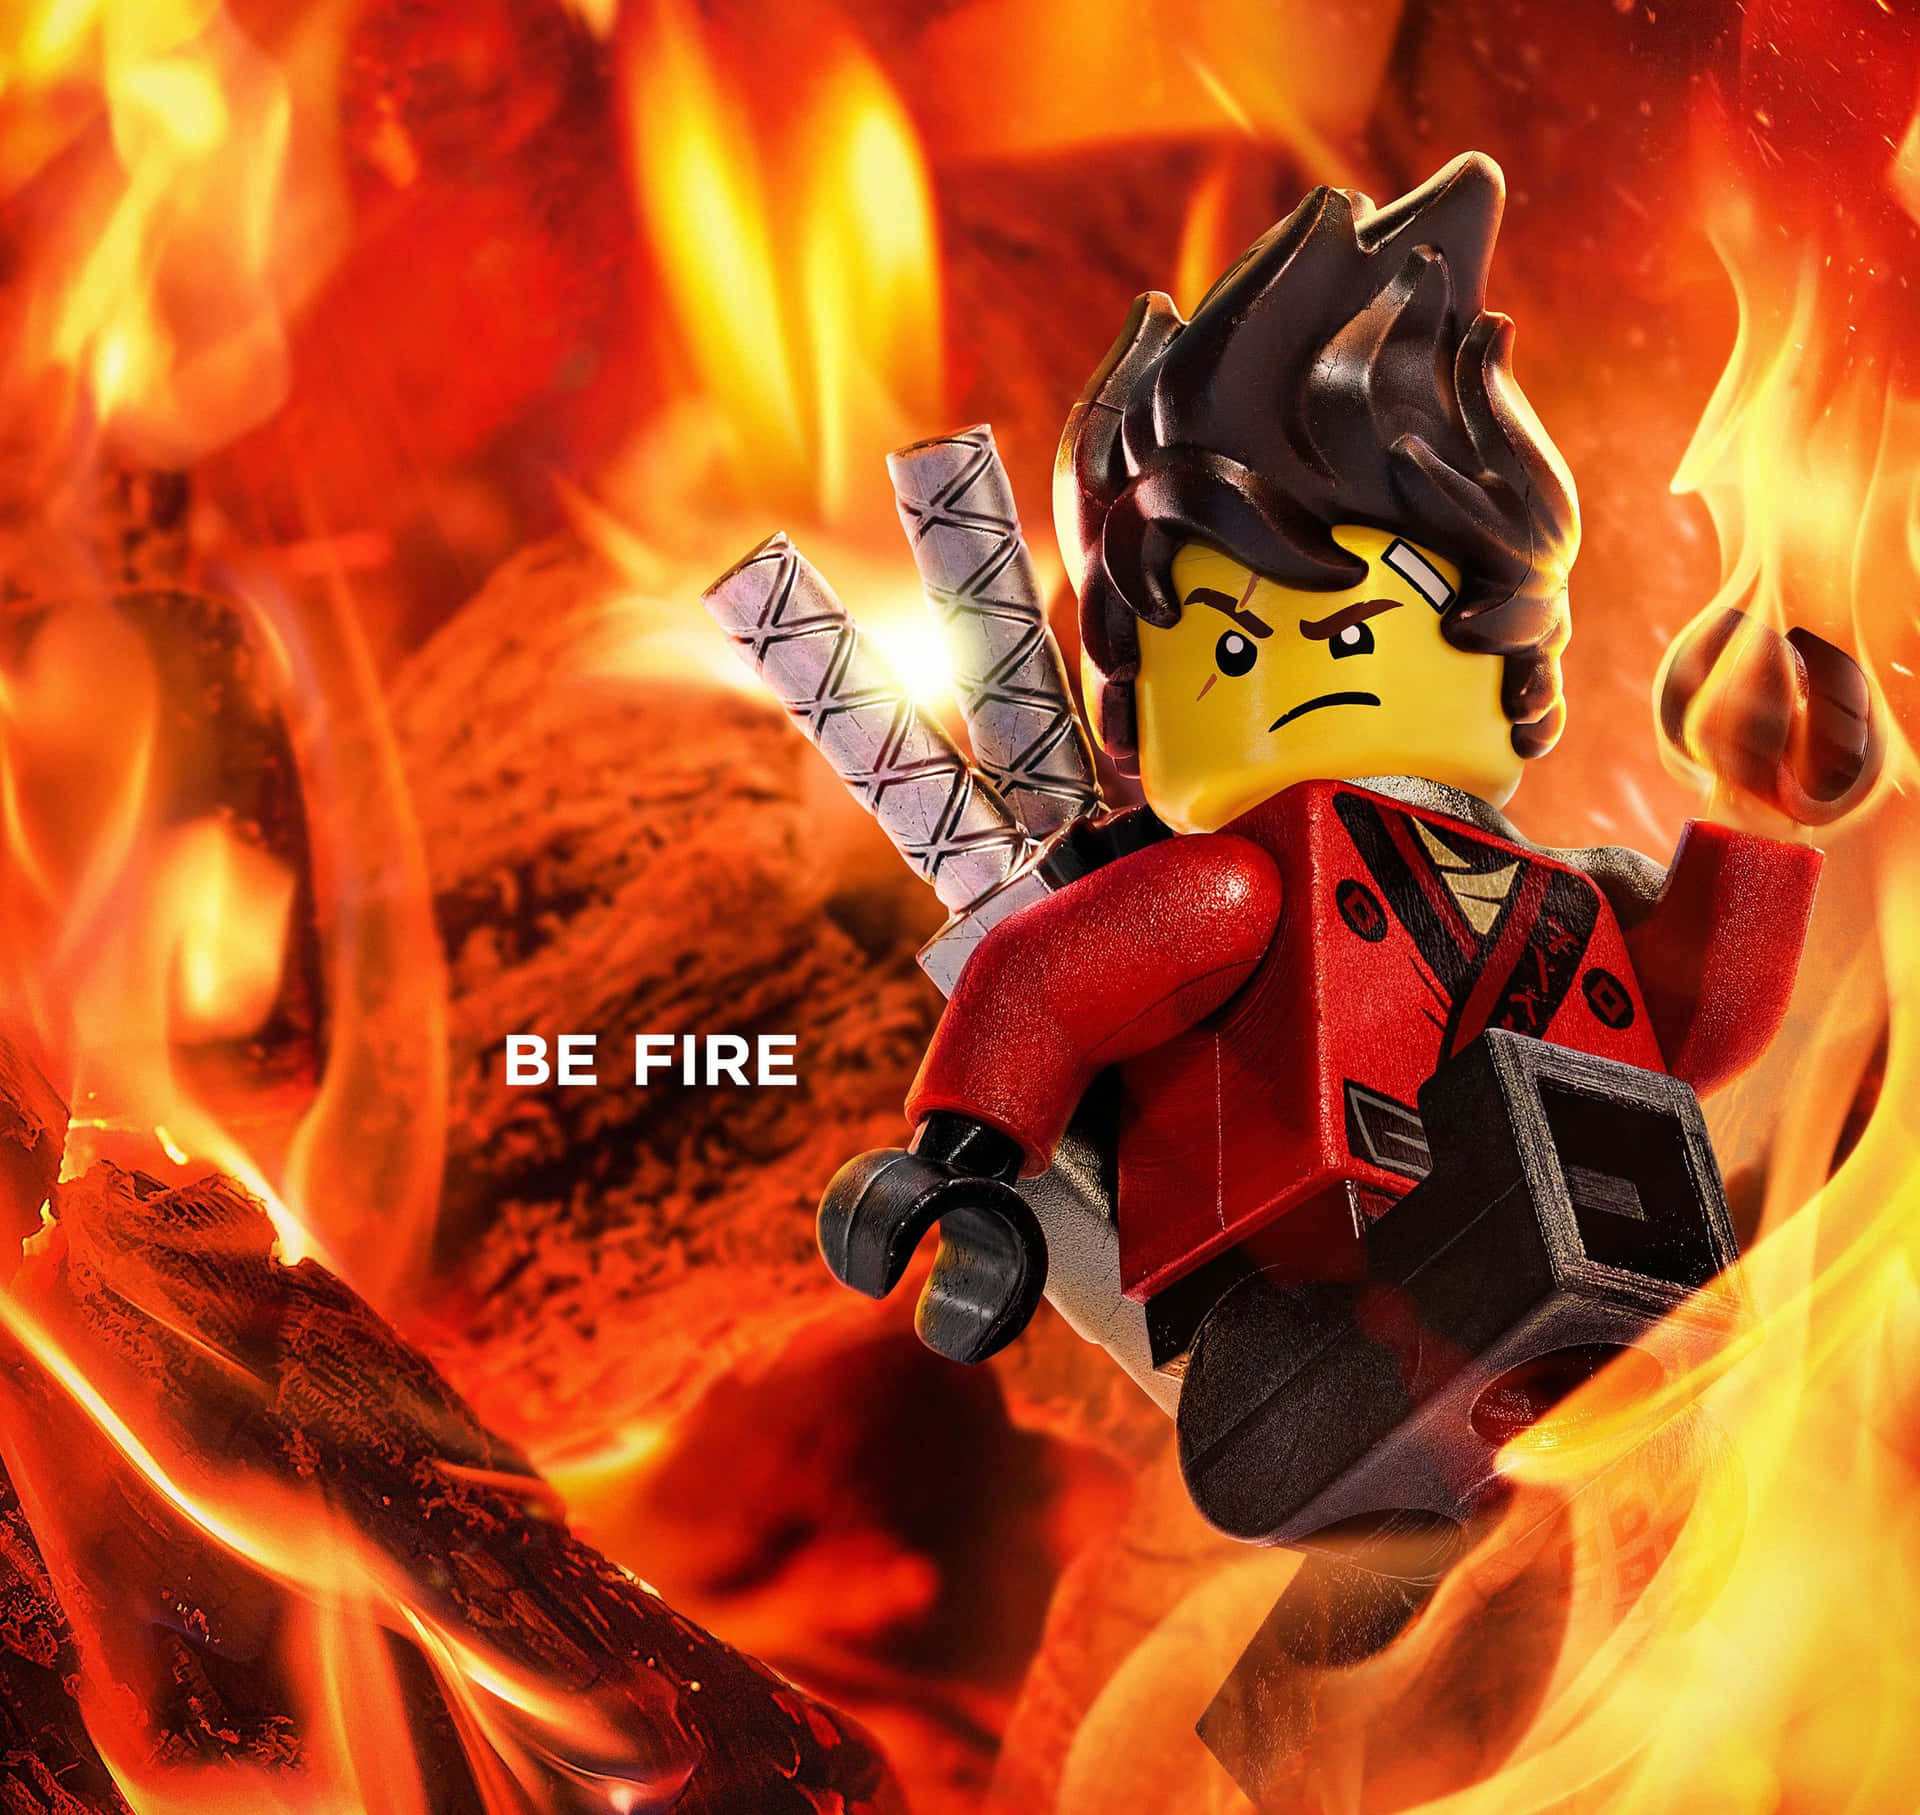 The Ninjago heroes assemble for action in a colorful, high-resolution wallpaper